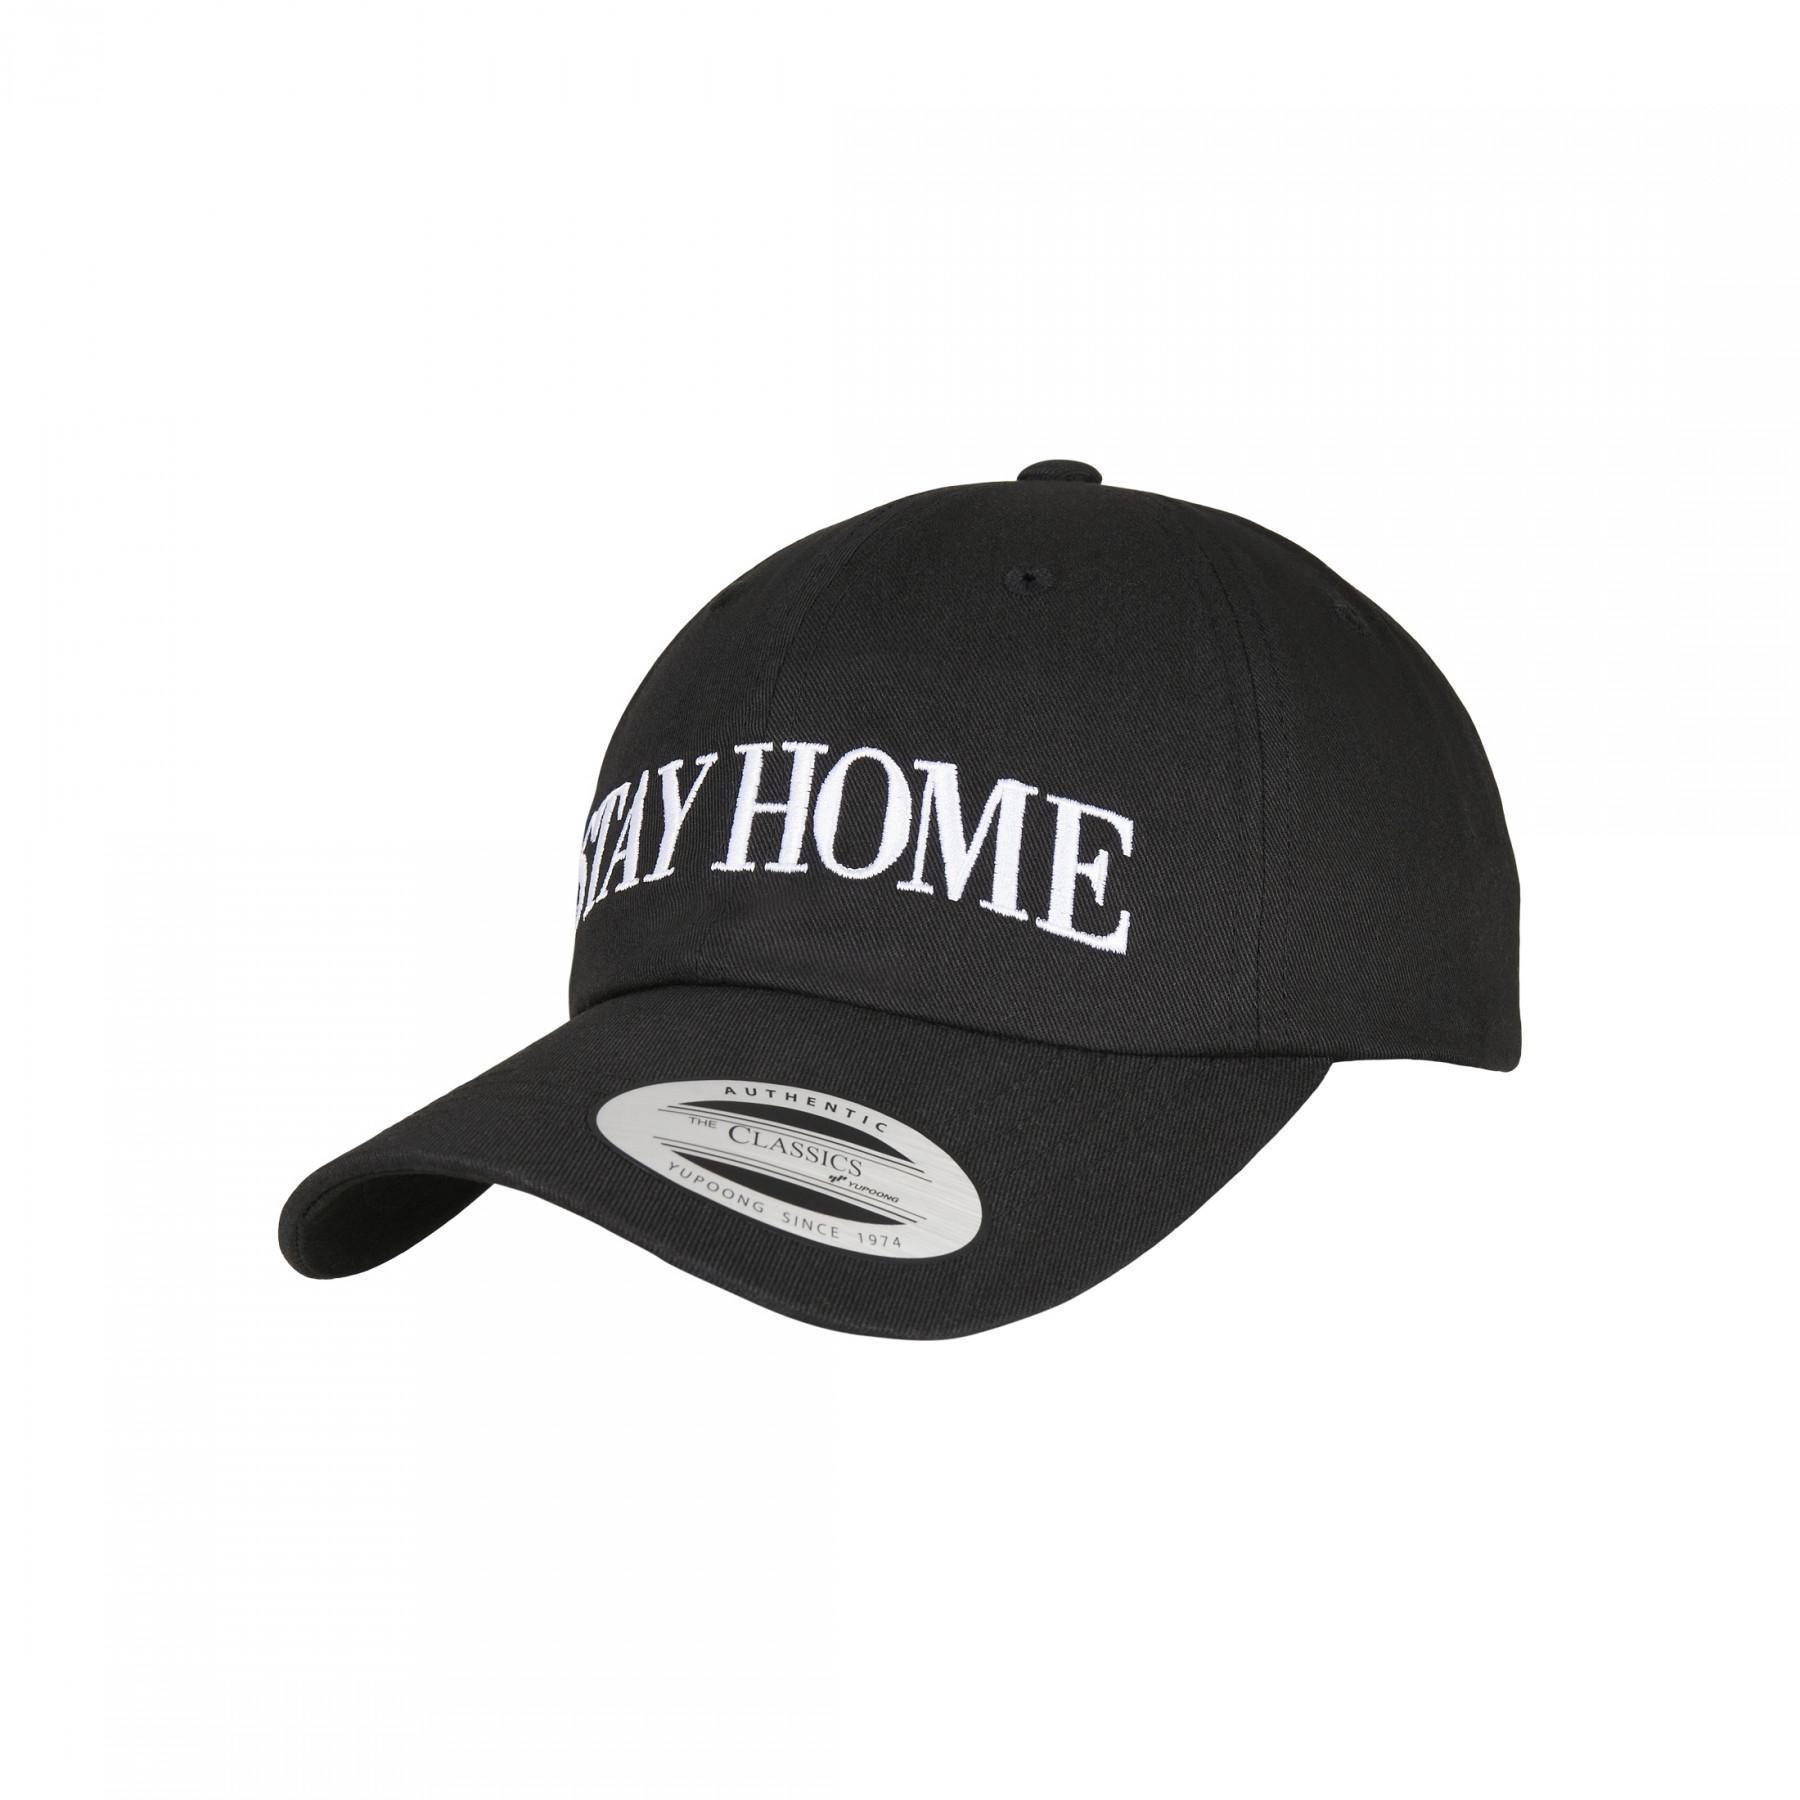 Casquette Mister Tee stay home emb dad